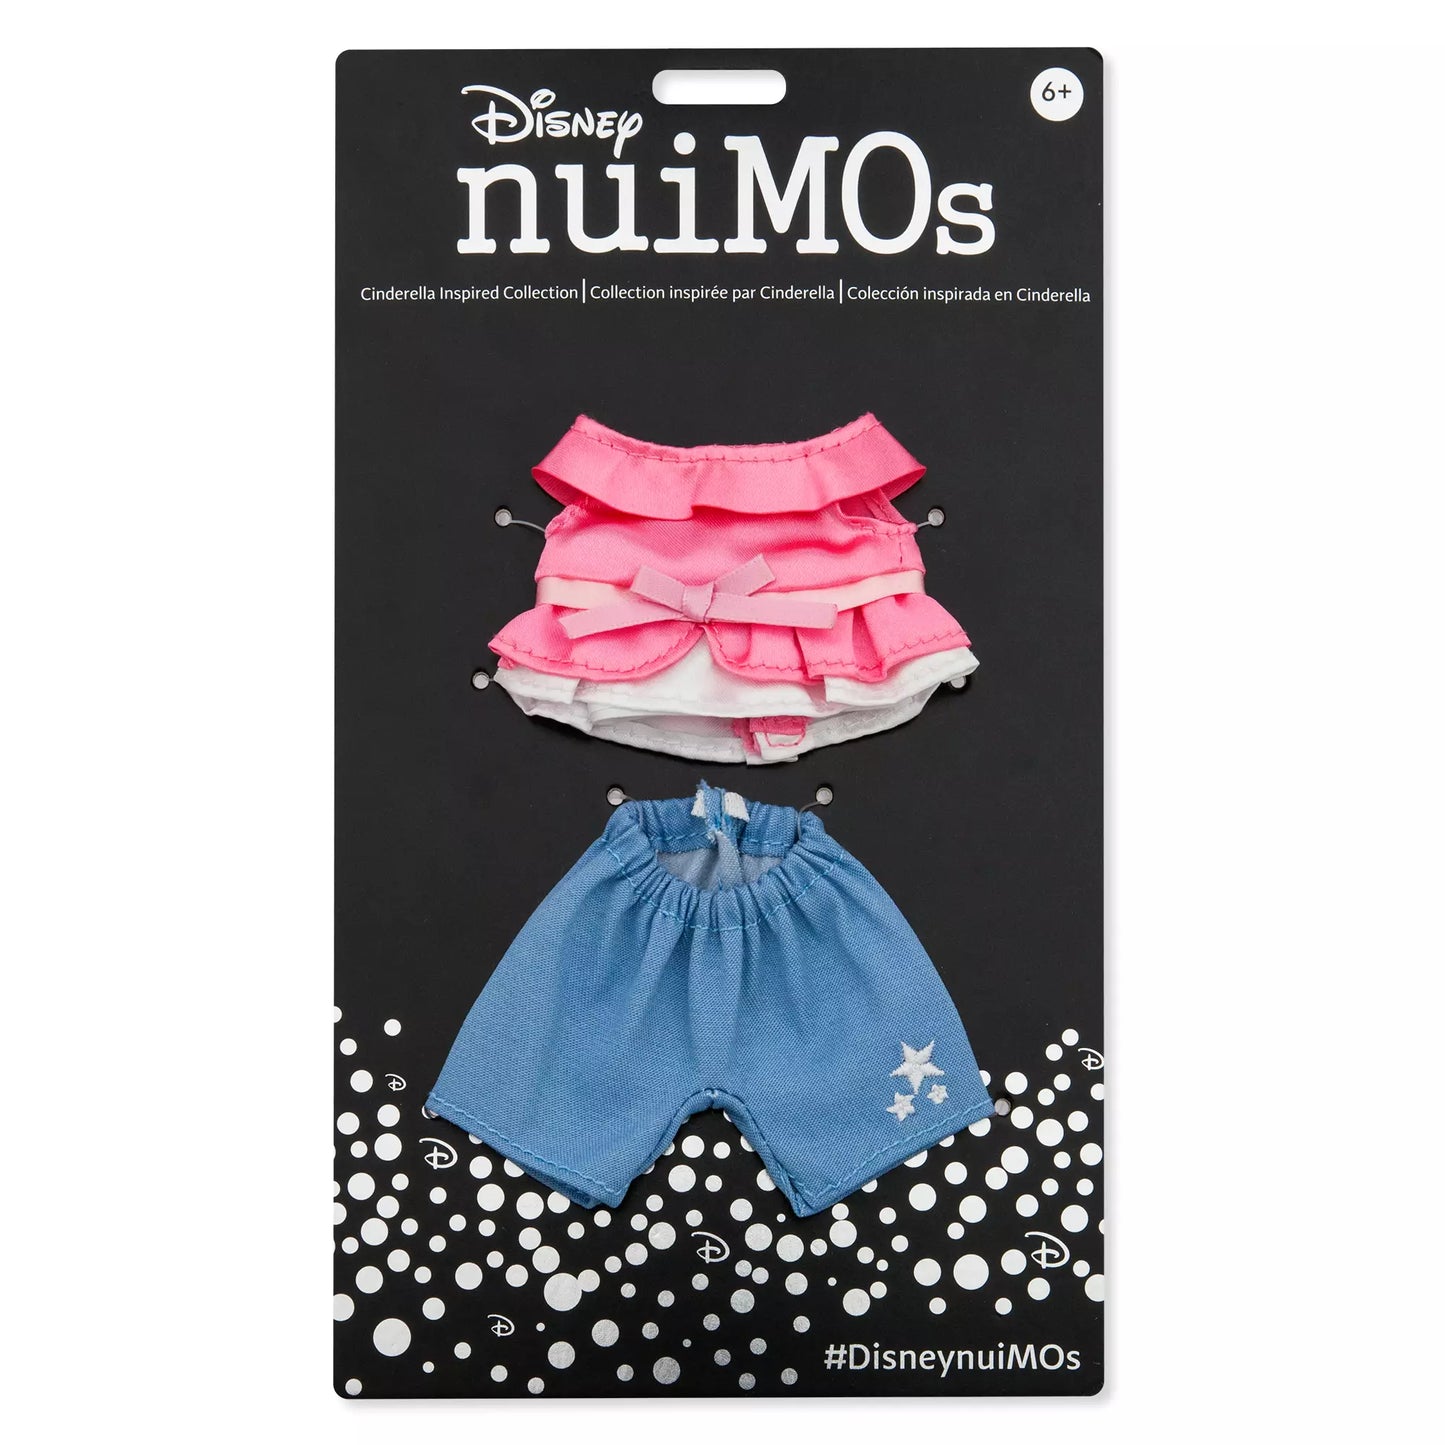 Disney NuiMOs Cinderella Inspired Outfit